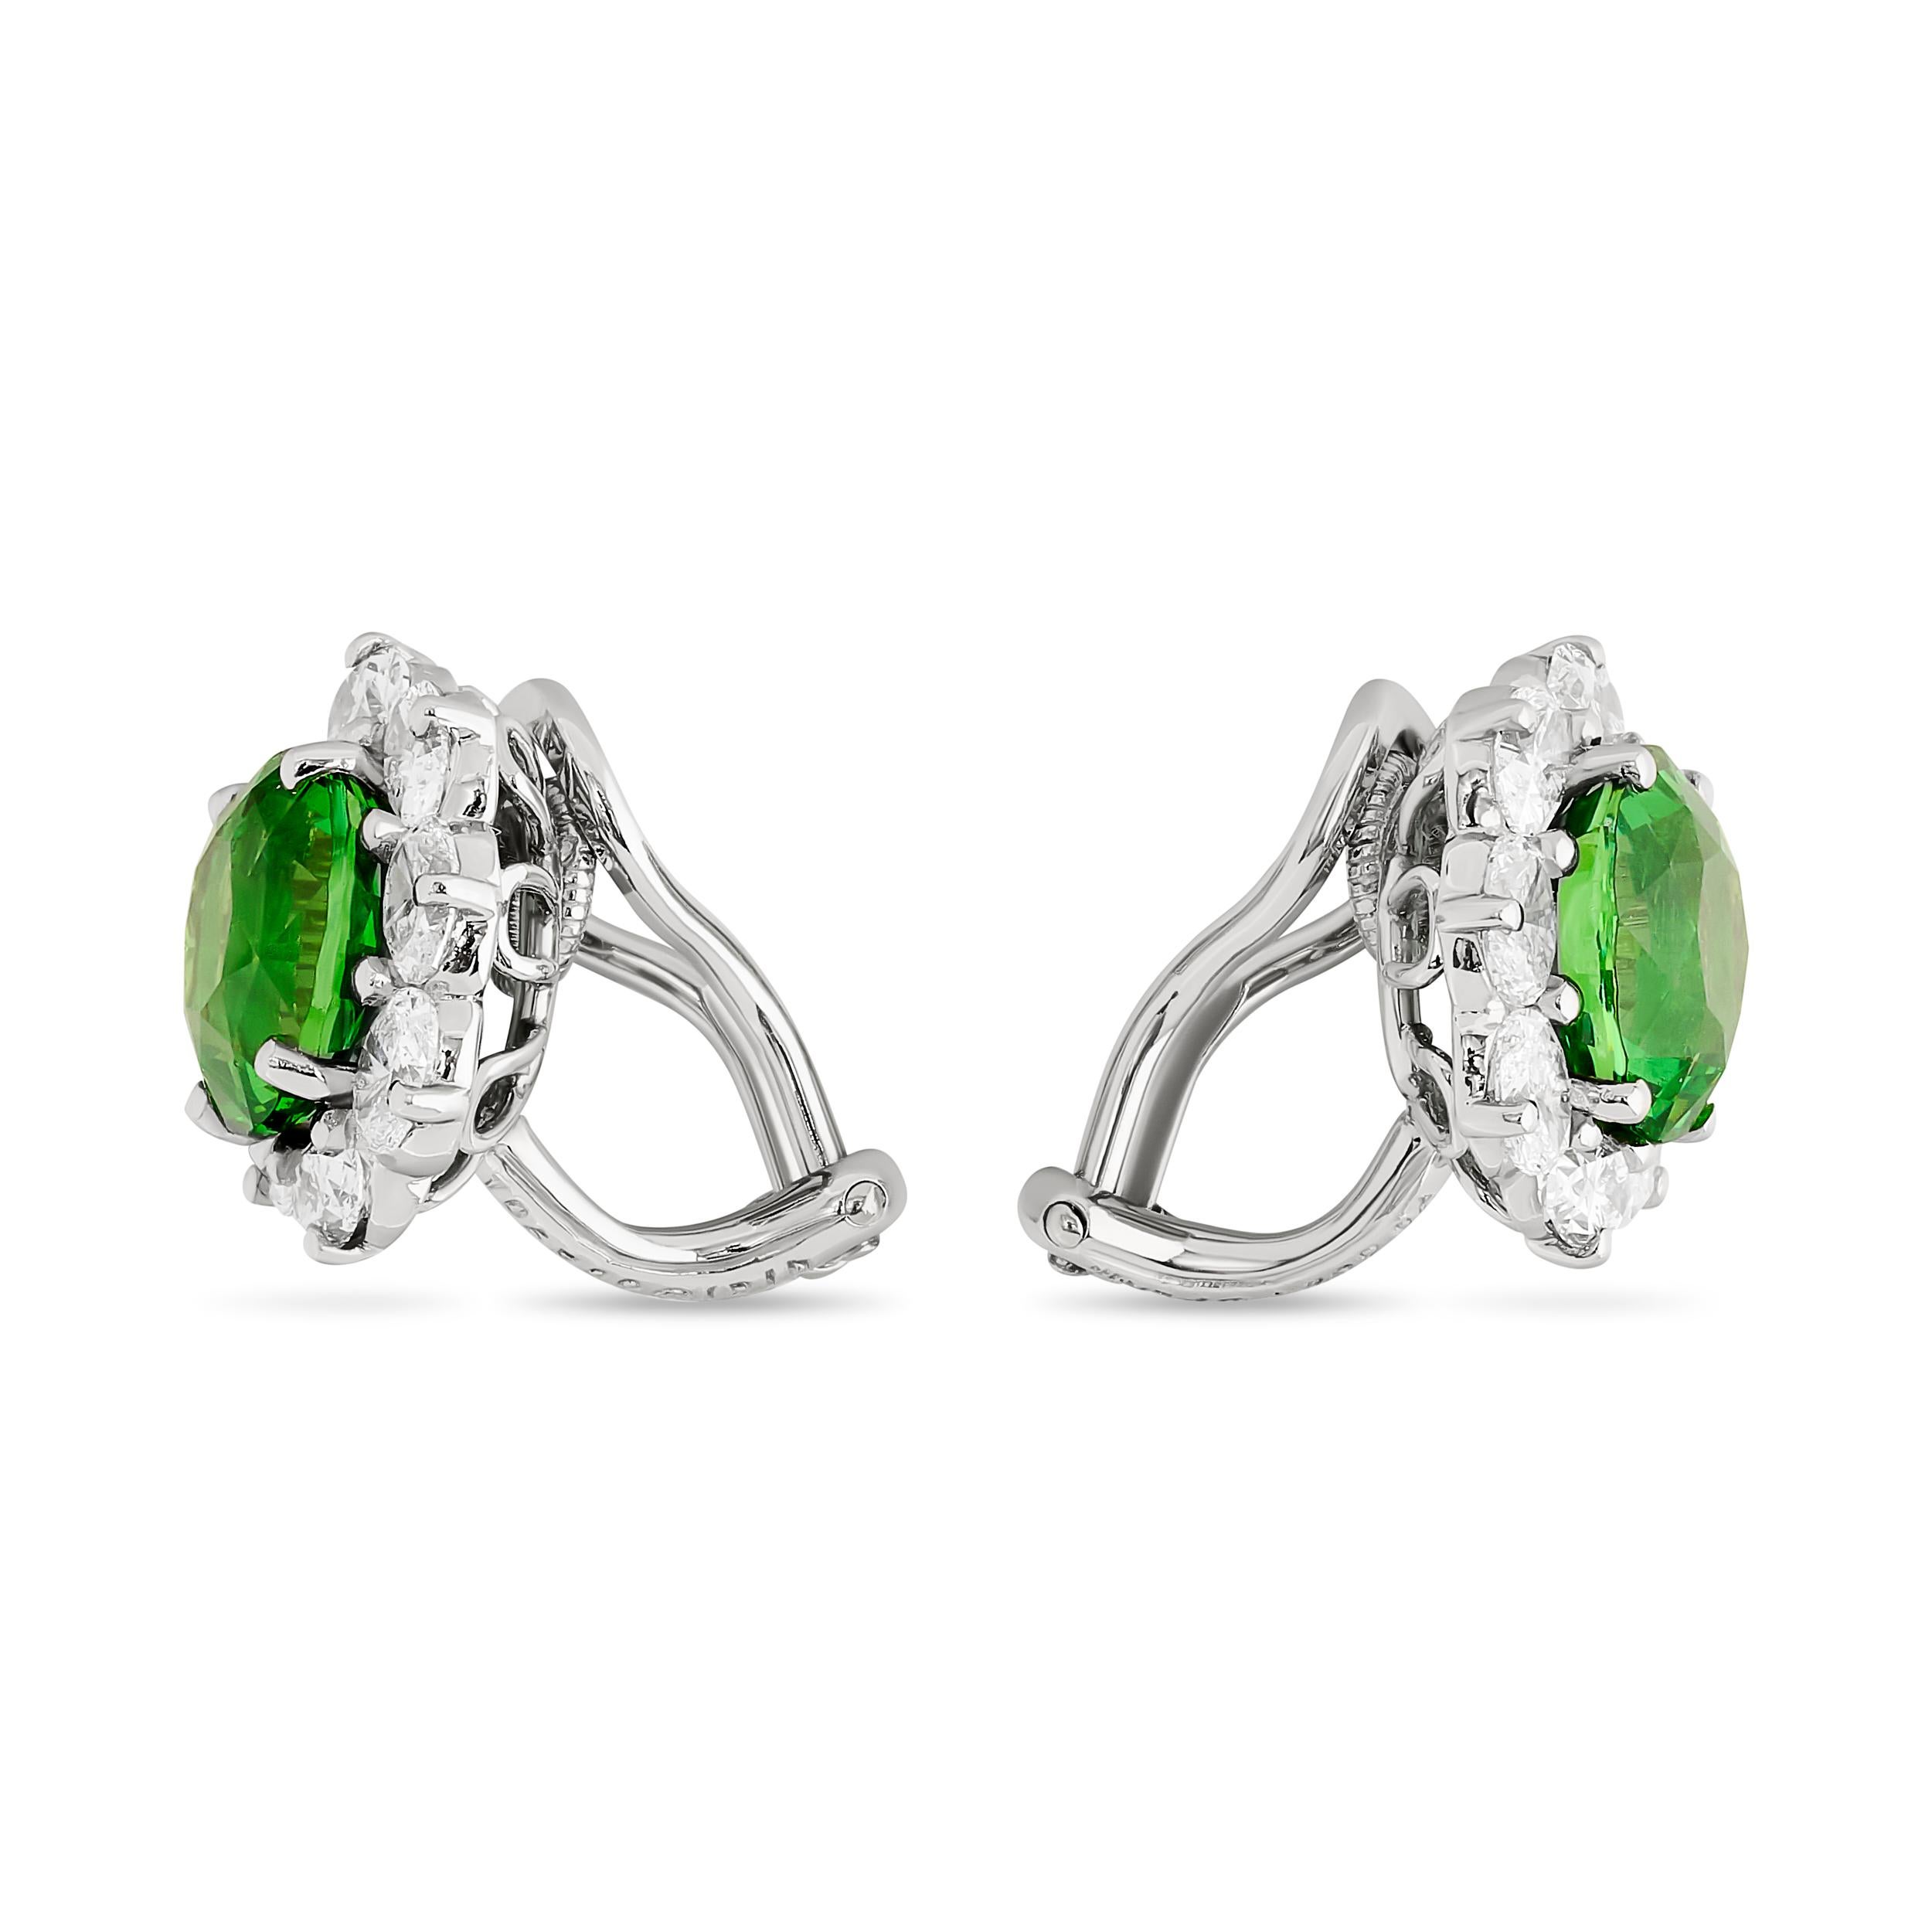 Adorn yourself in lush beauty with these Oscar Heyman vibrant, green tsavorite garnet and diamond halo earrings.

These earrings feature two oval green tsavorite garnets that weigh approximately 6.15 carats. There are also 16 oval diamonds totaling